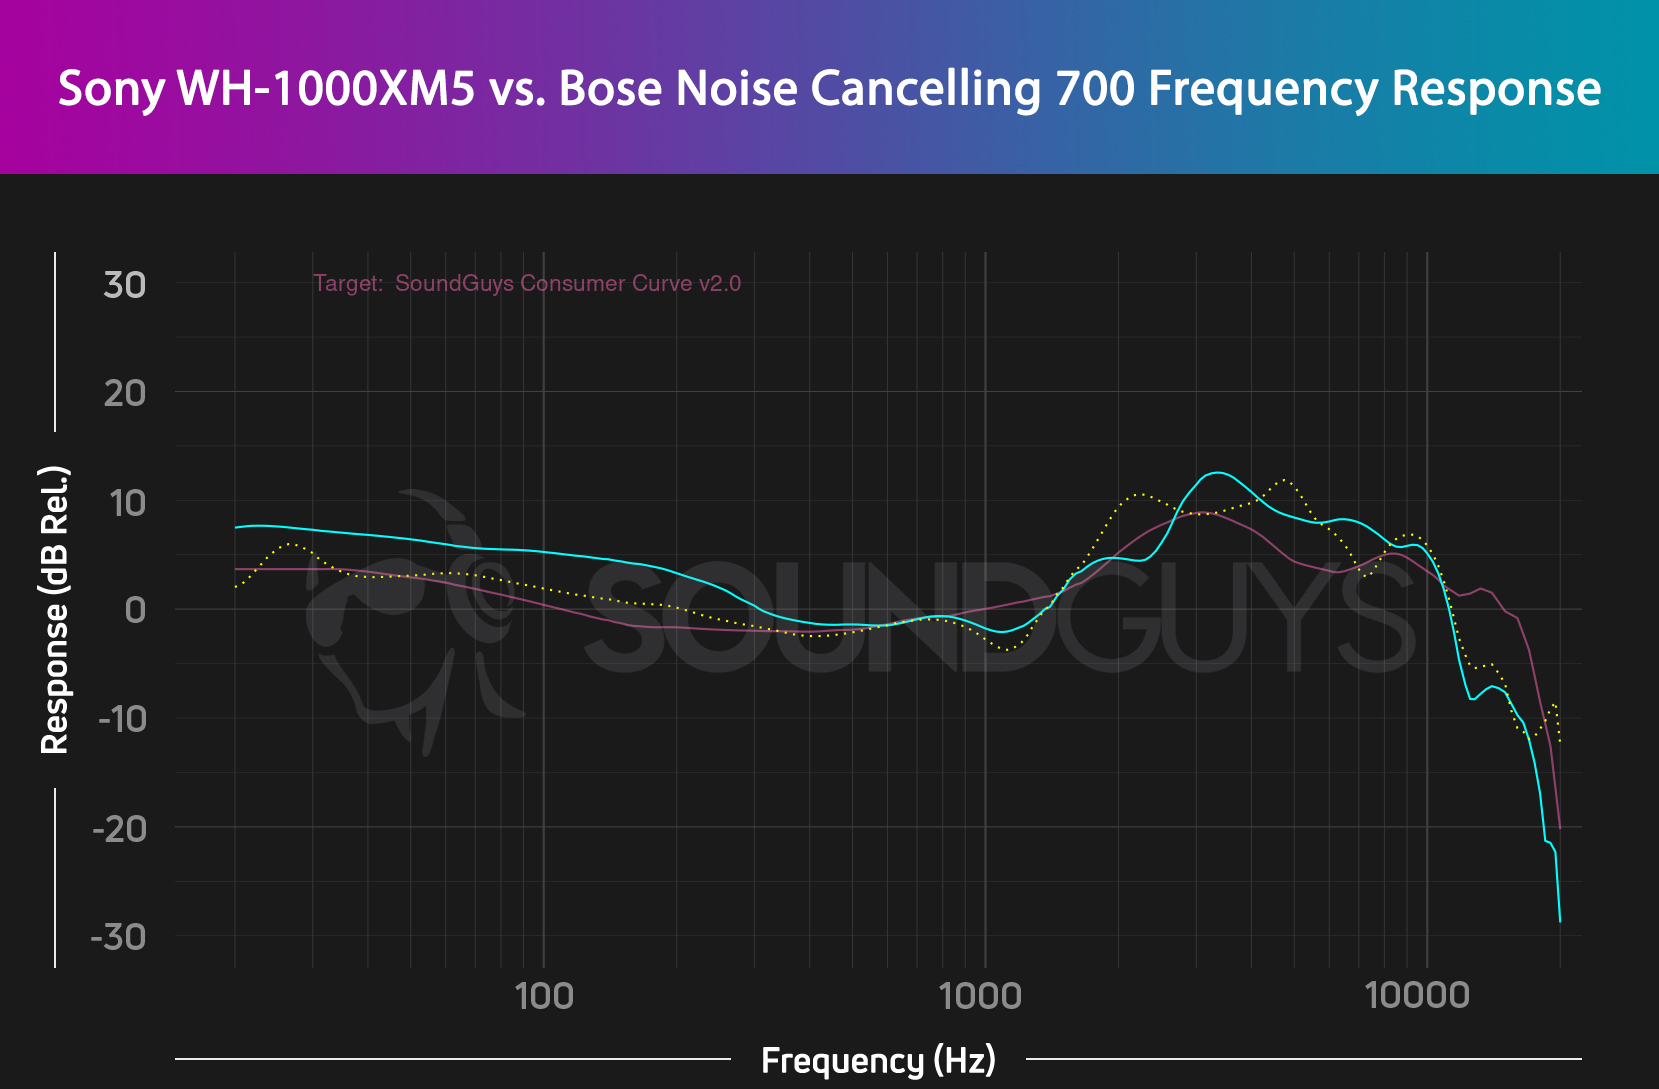 A frequency response chart for the Sony WH-1000XM5 shown in cyan and the Bose Noise Cancelling 700 shown with a dotted yellow line. The chart shows that the Sony headphones boost bass more than the Bose headphones.